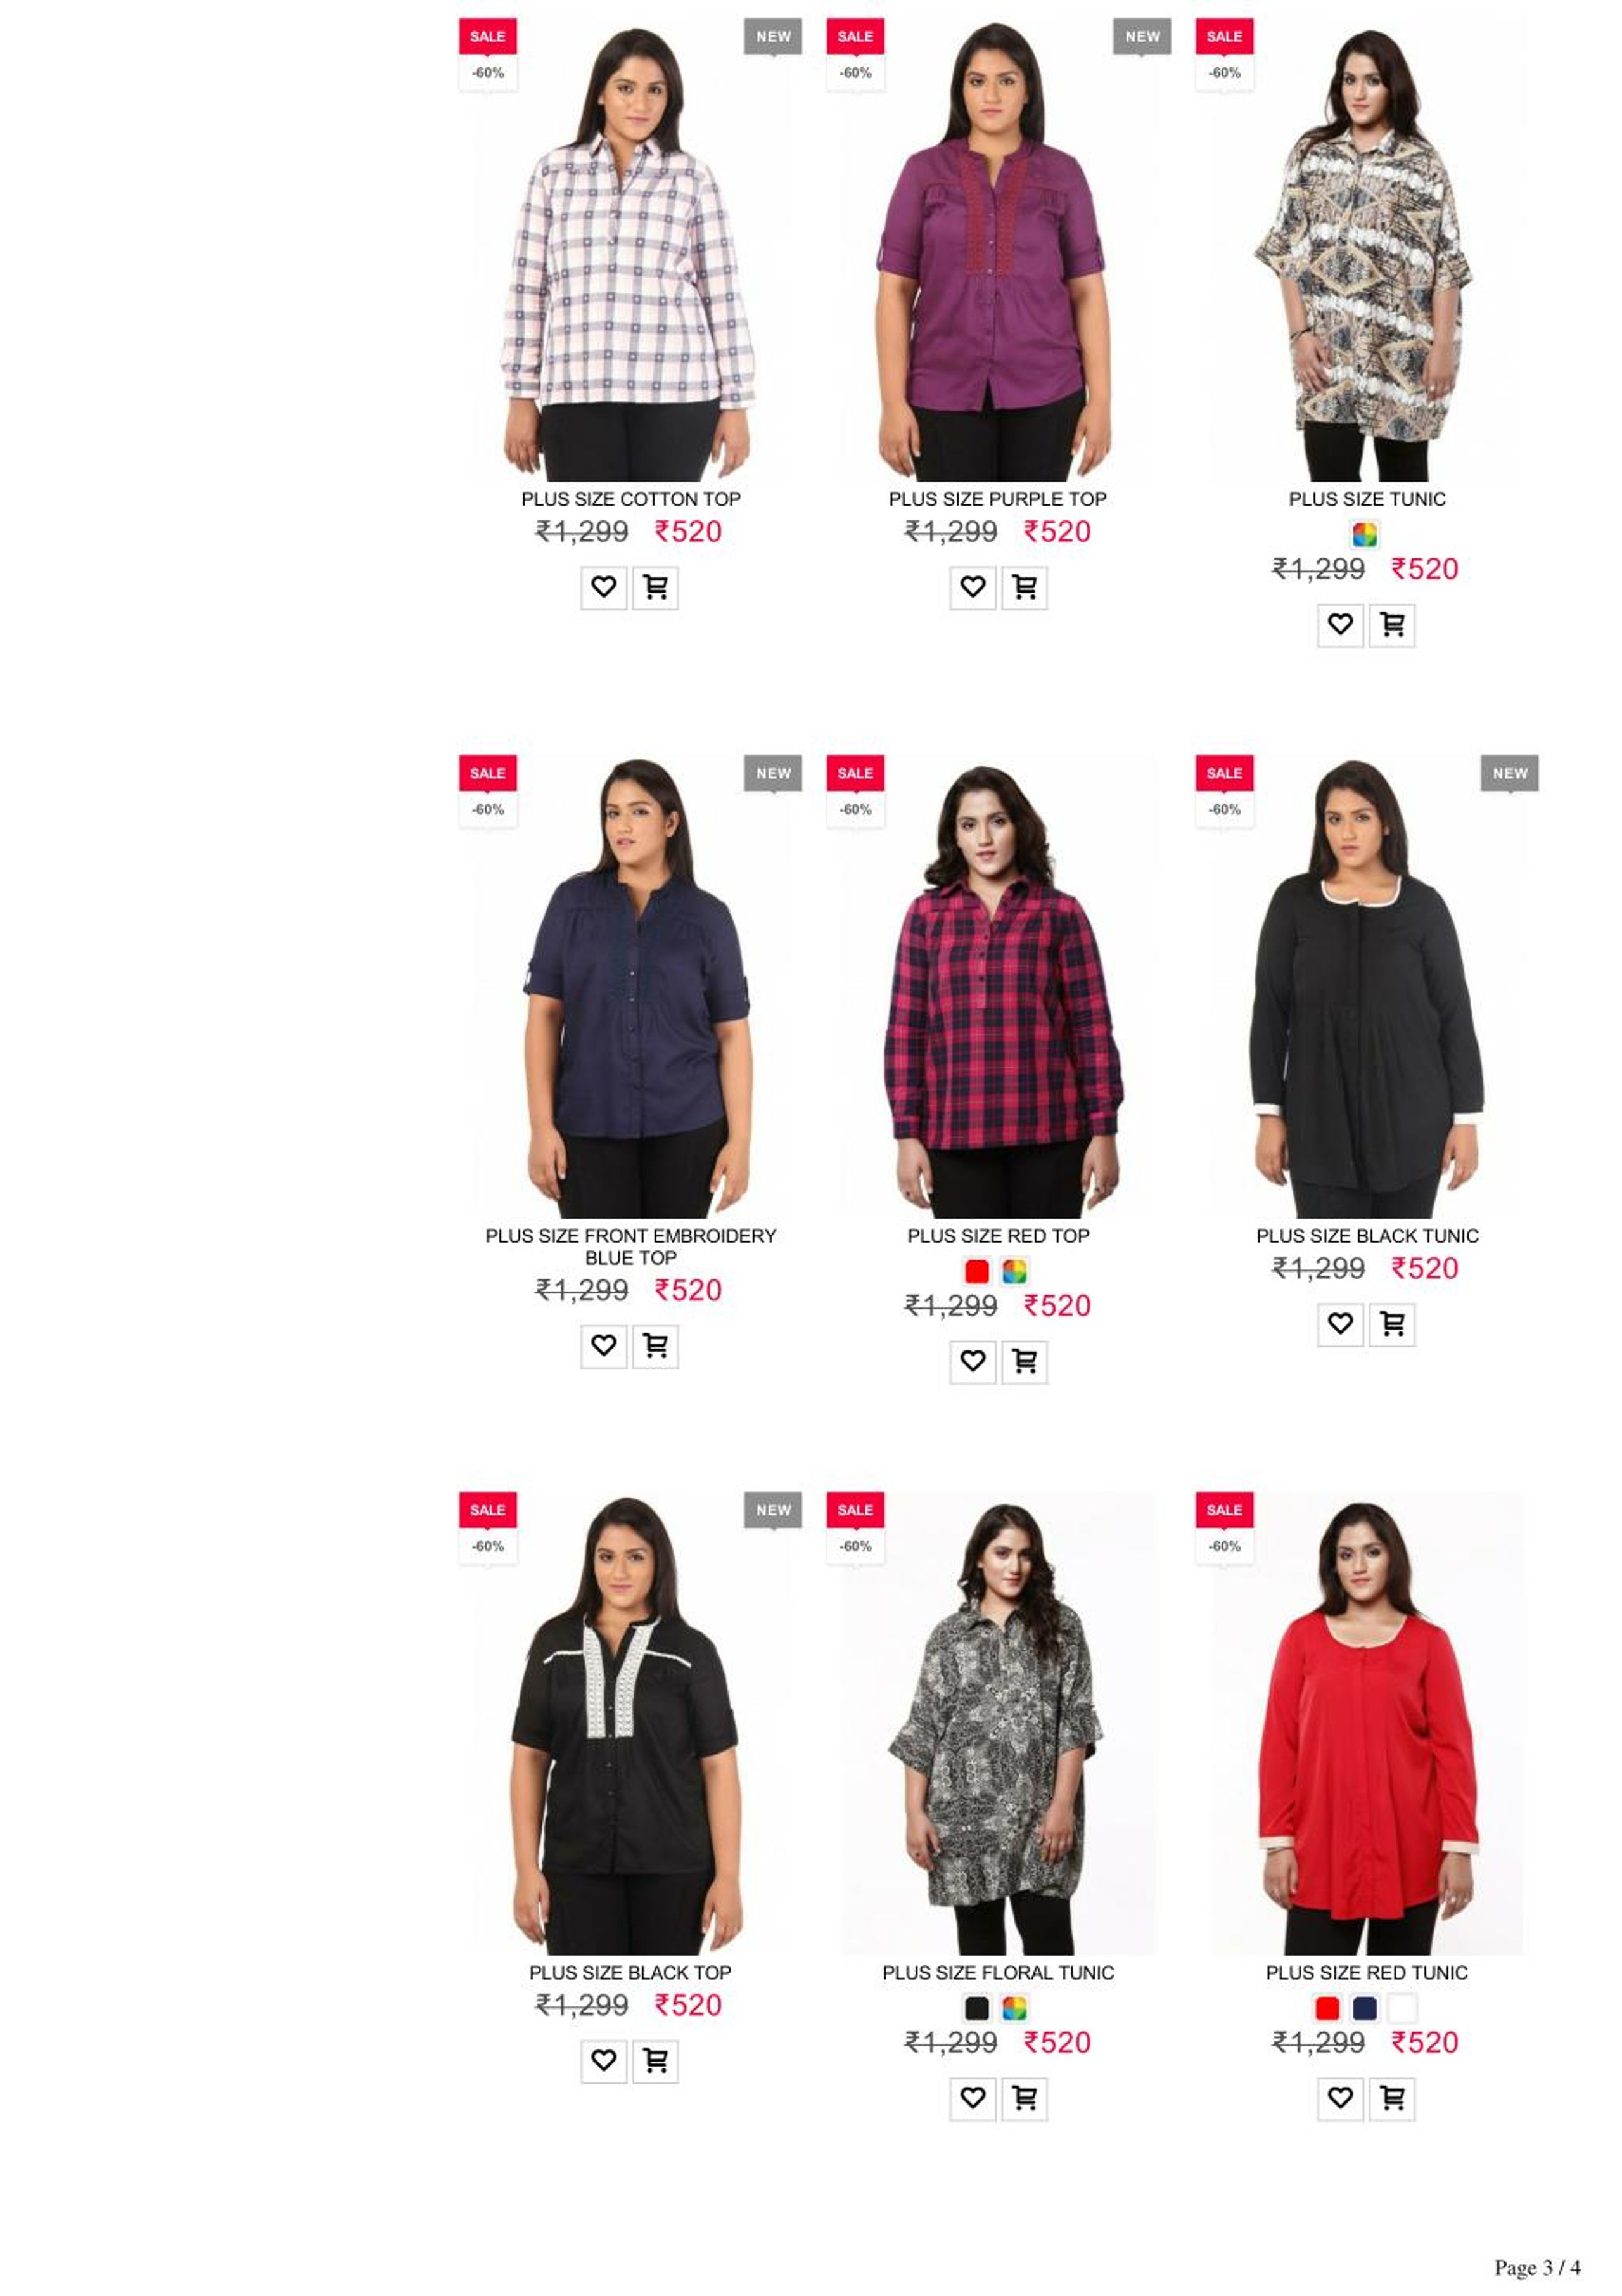 Fashion Bug Store- Buy Updated Fashion Dresses and Plus-Size